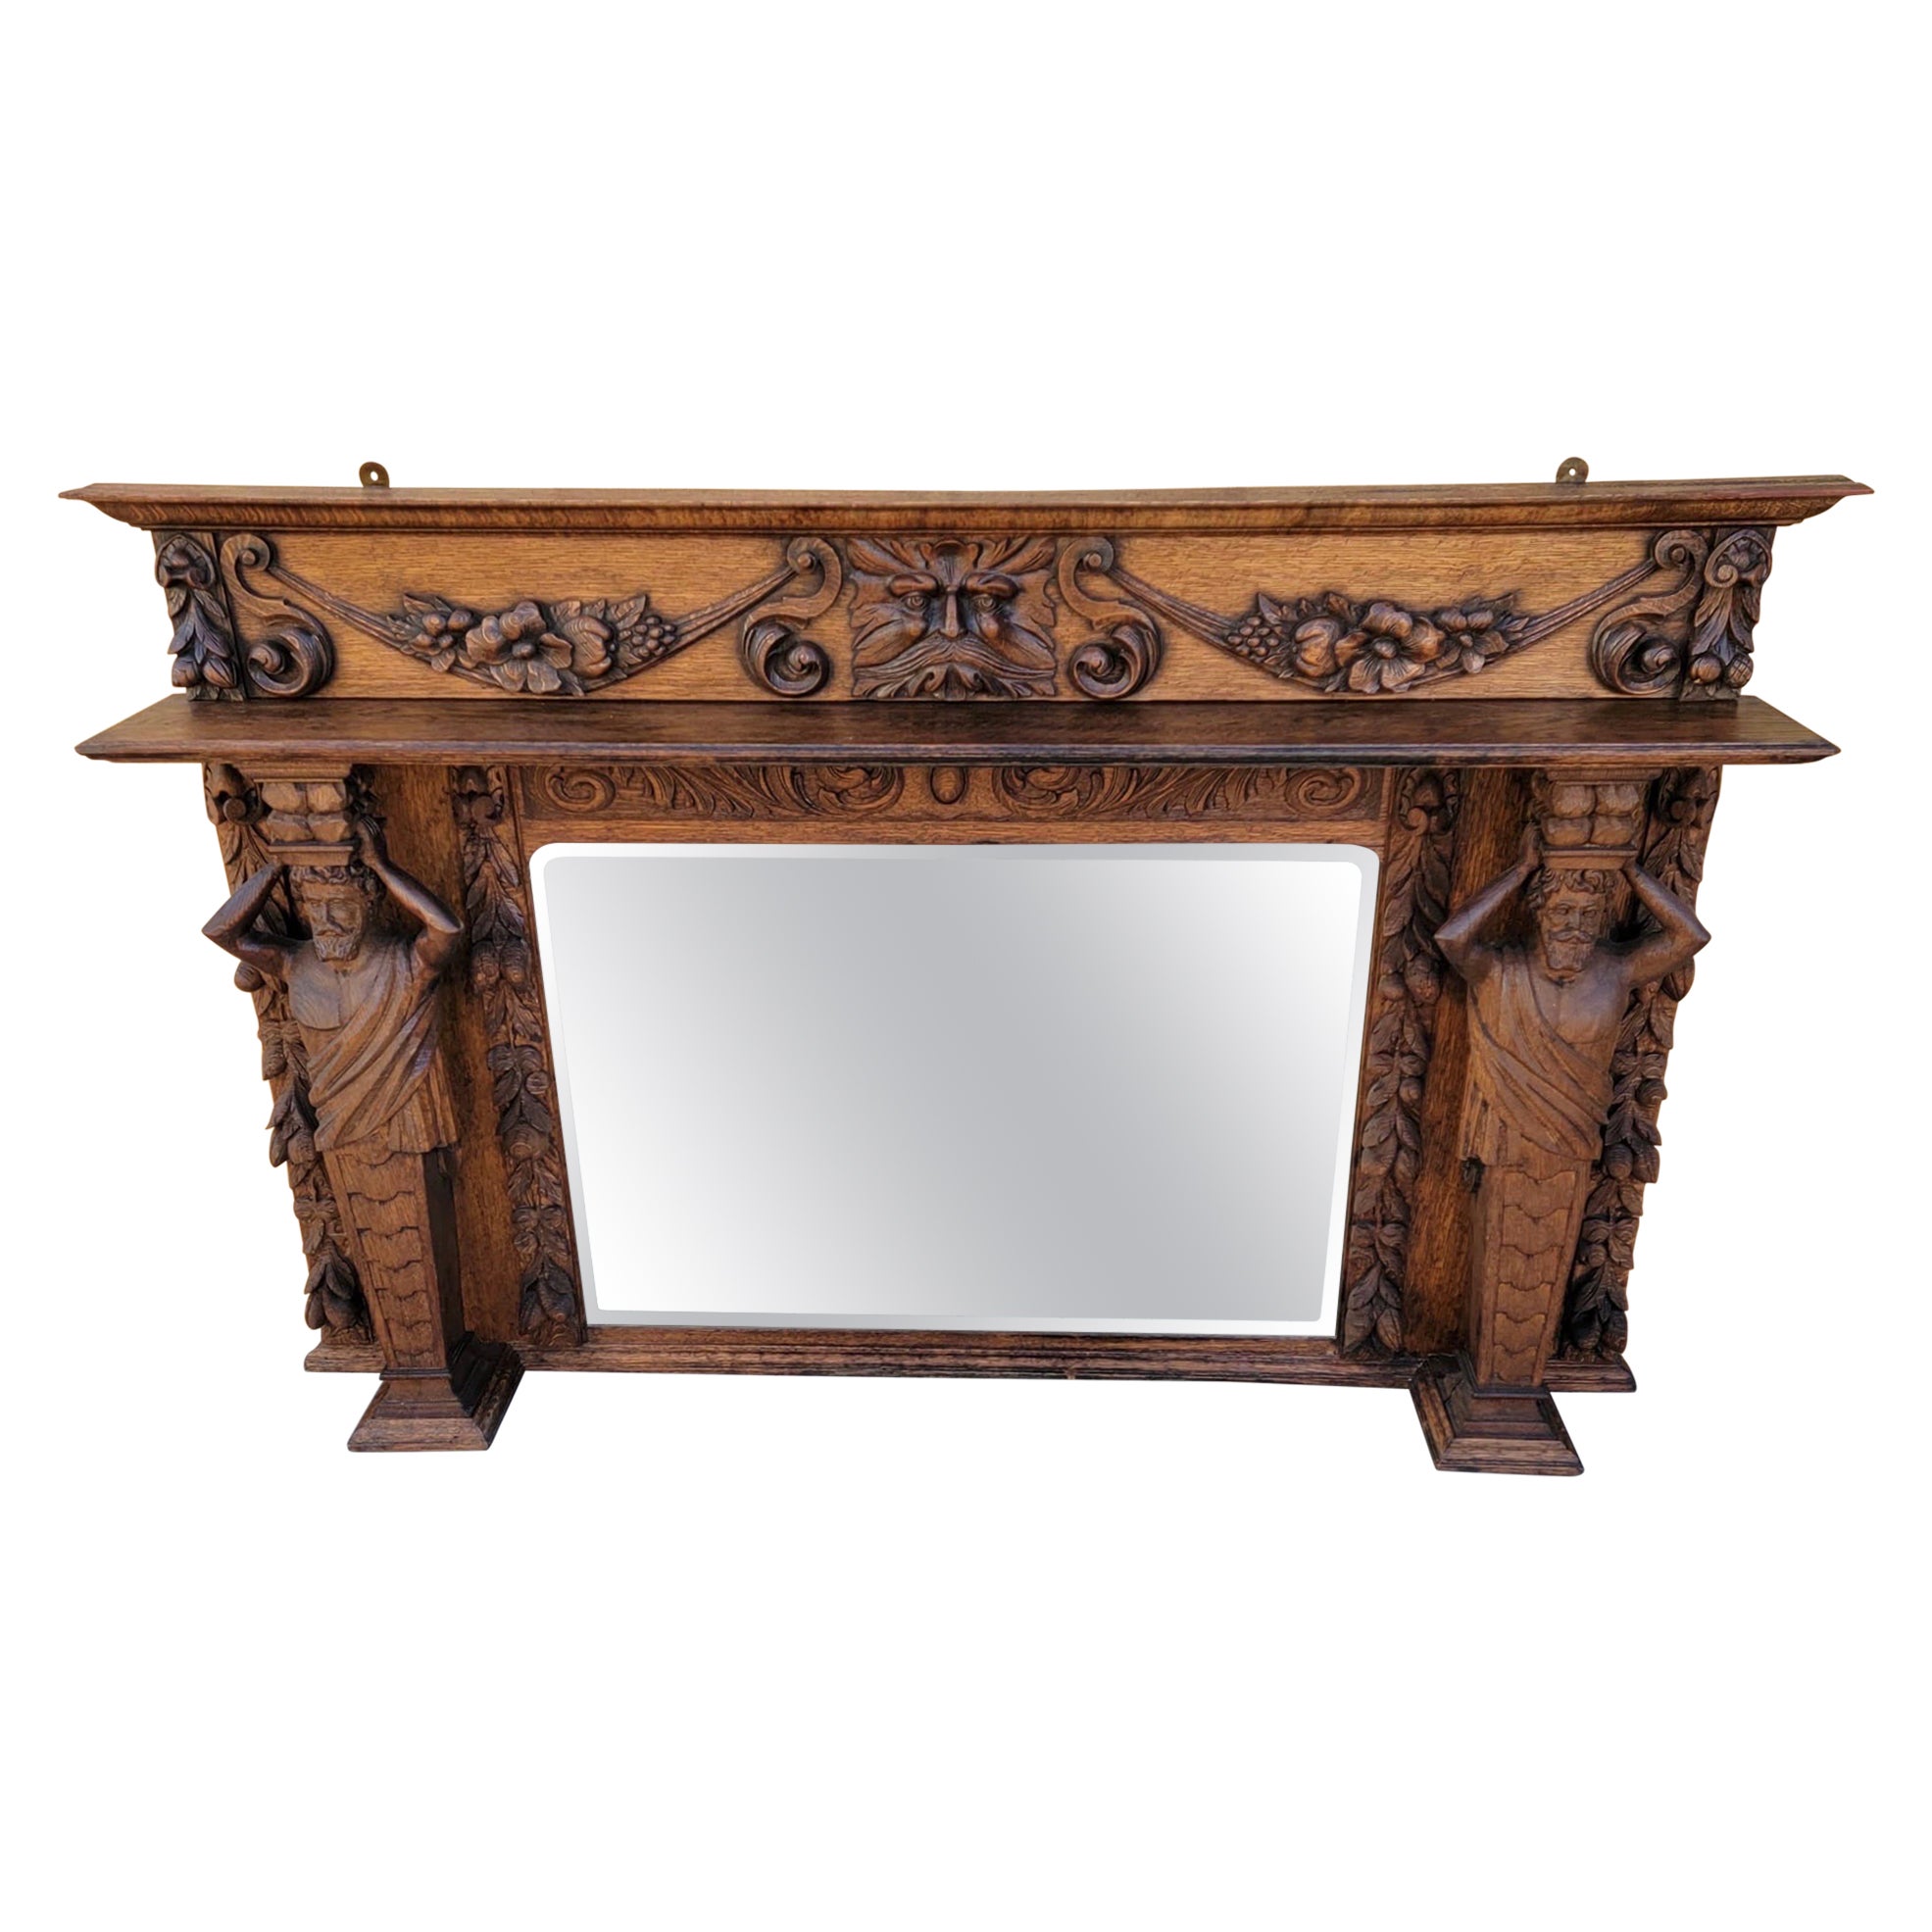  Antique Neoclassical Carved Figural Quarter-Sawn Fireplace Mantel Mirror Topper For Sale